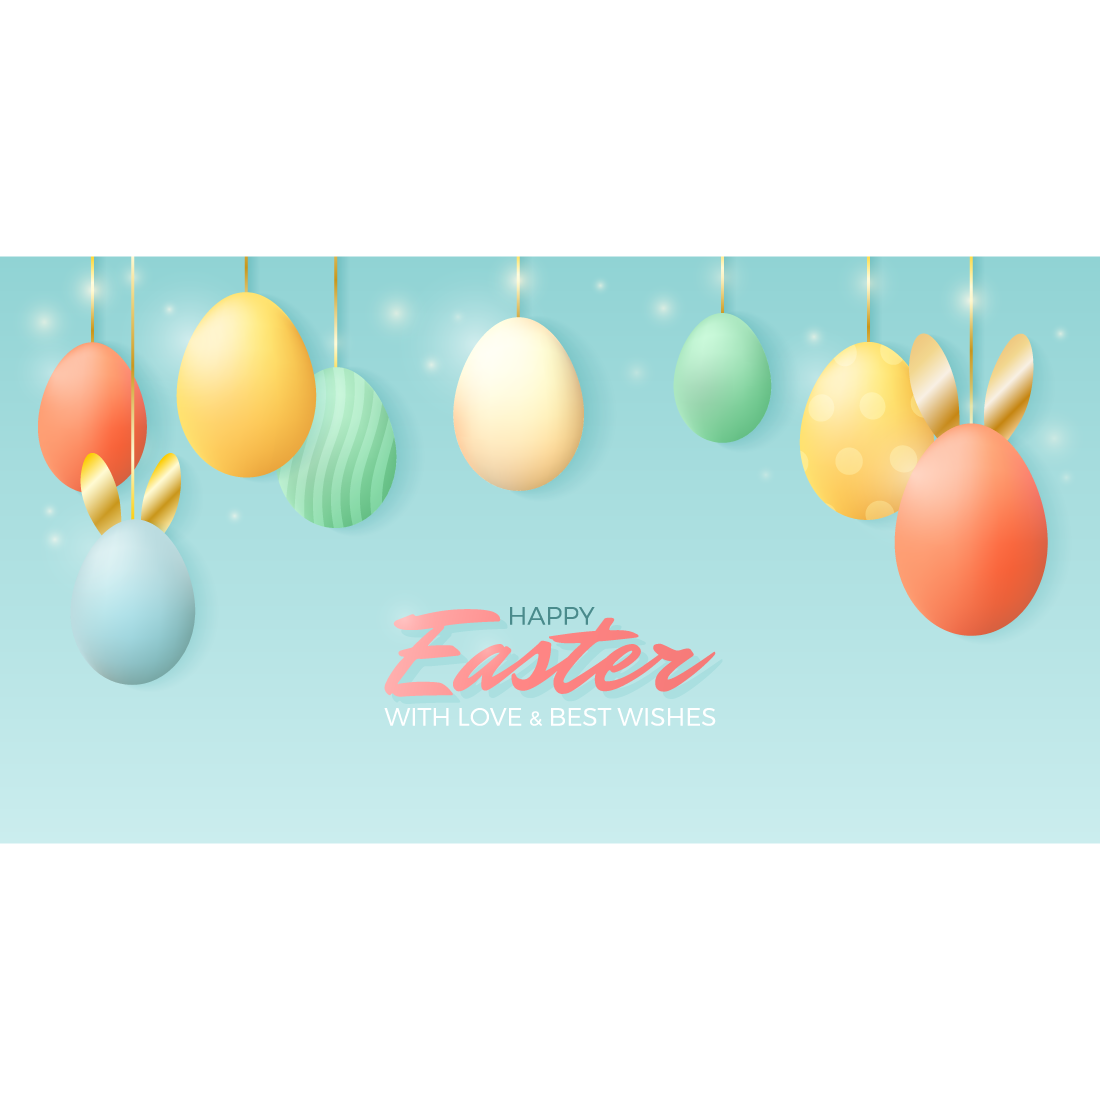 Happy easter with love and best wishes.